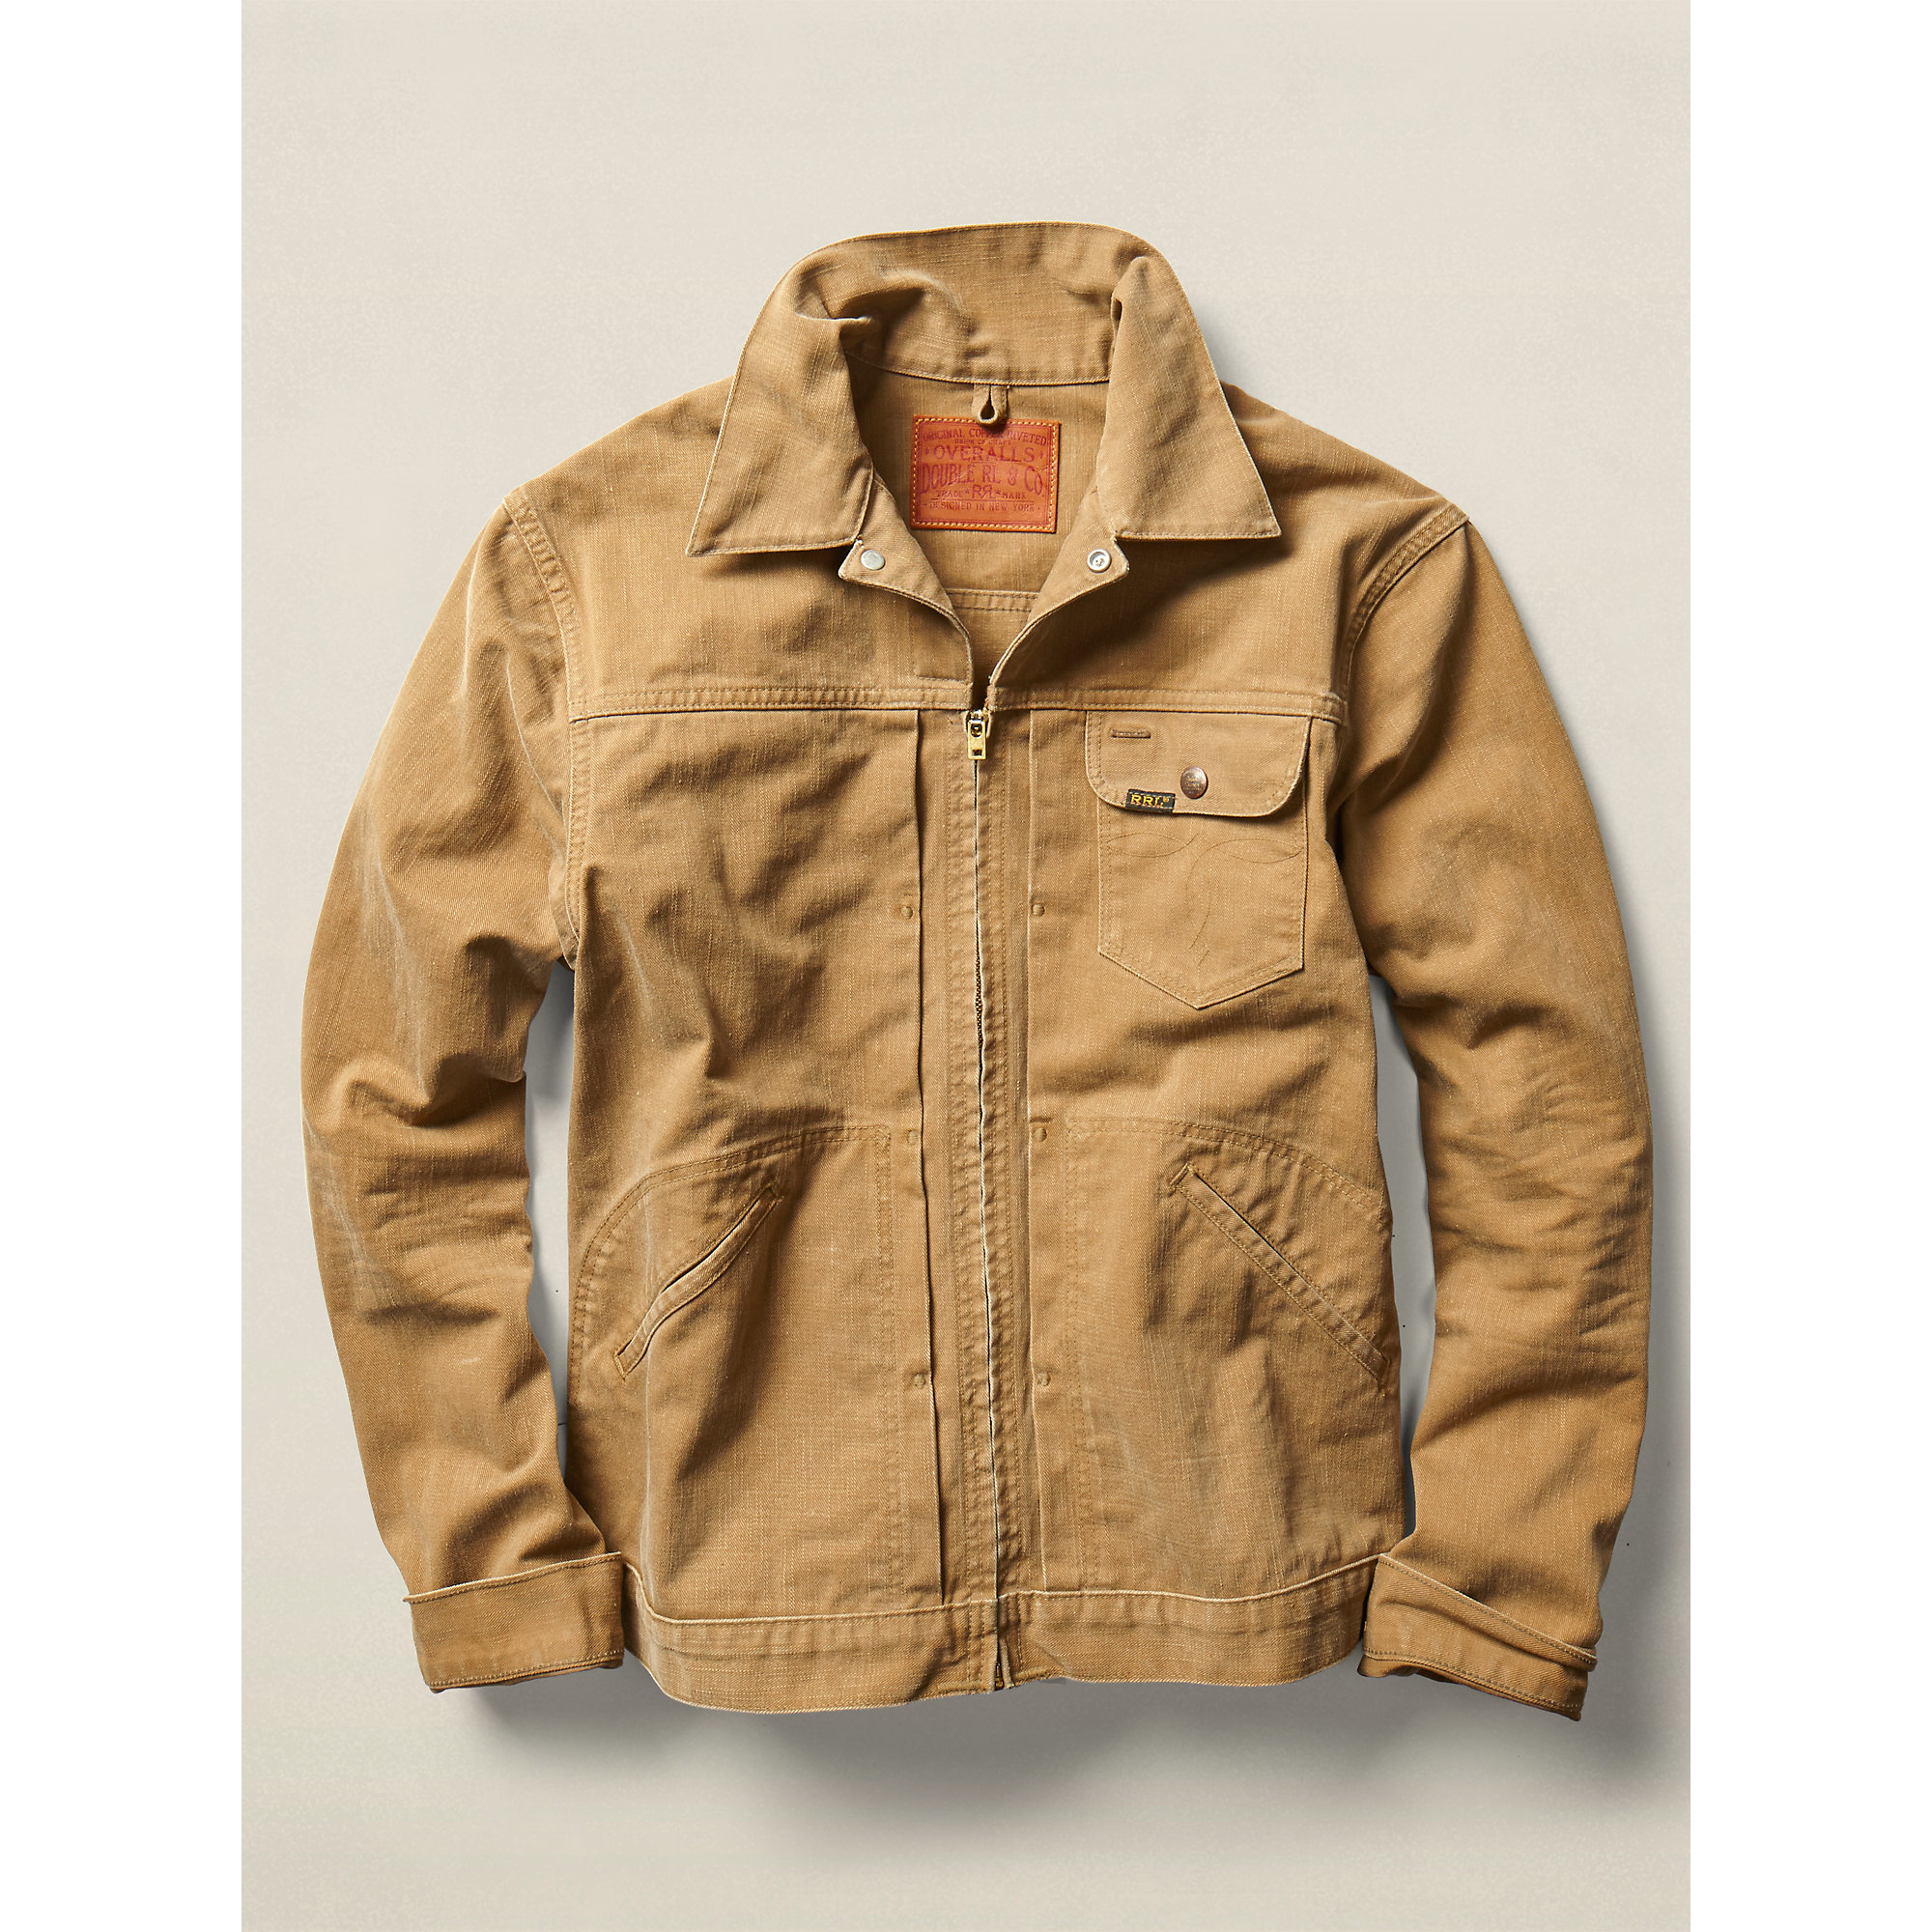 rrl-carhartt-brown-cotton-twill-jacket-brown-product-0-521092795-normal ...